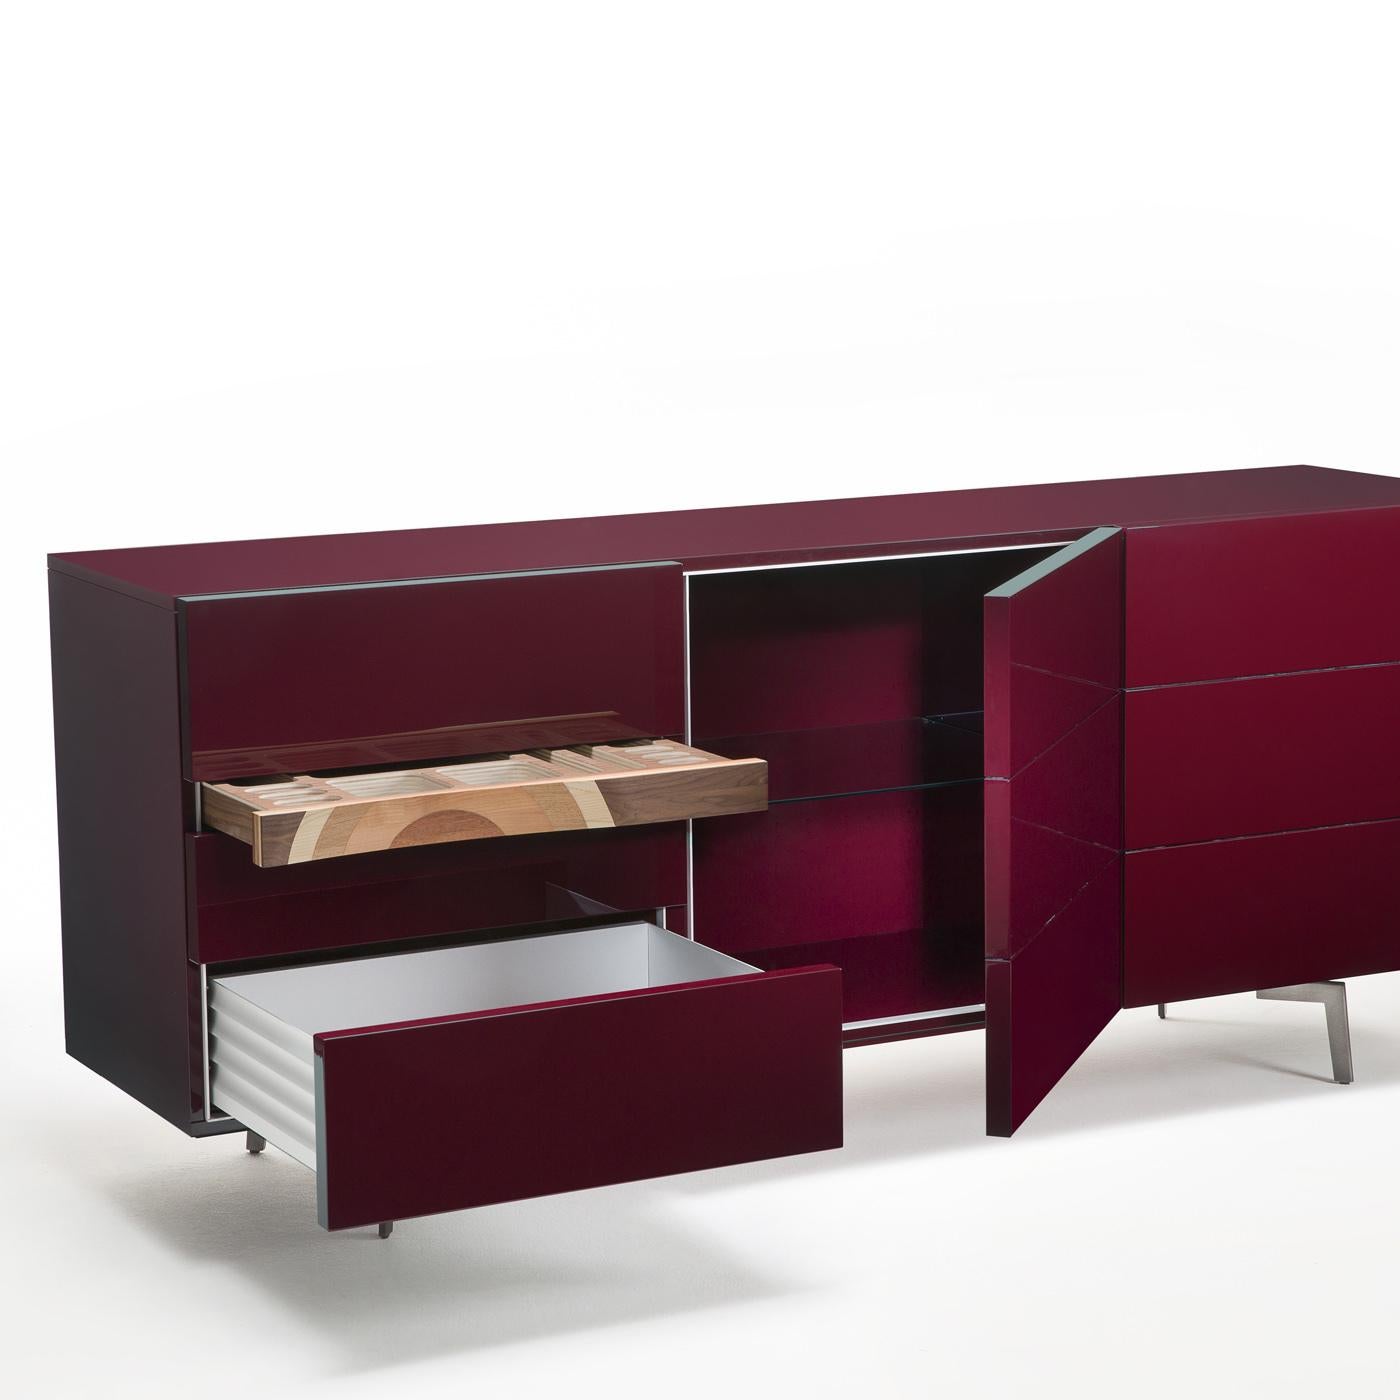 This simple and elegant sideboard by Toyo Ito is enriched with a striking jewelry drawer made of five types of wood (mahogany, oak, cherry, walnut, and ash), that echoes the look of the Ripples Bench. The frame, doors and other six drawers are made